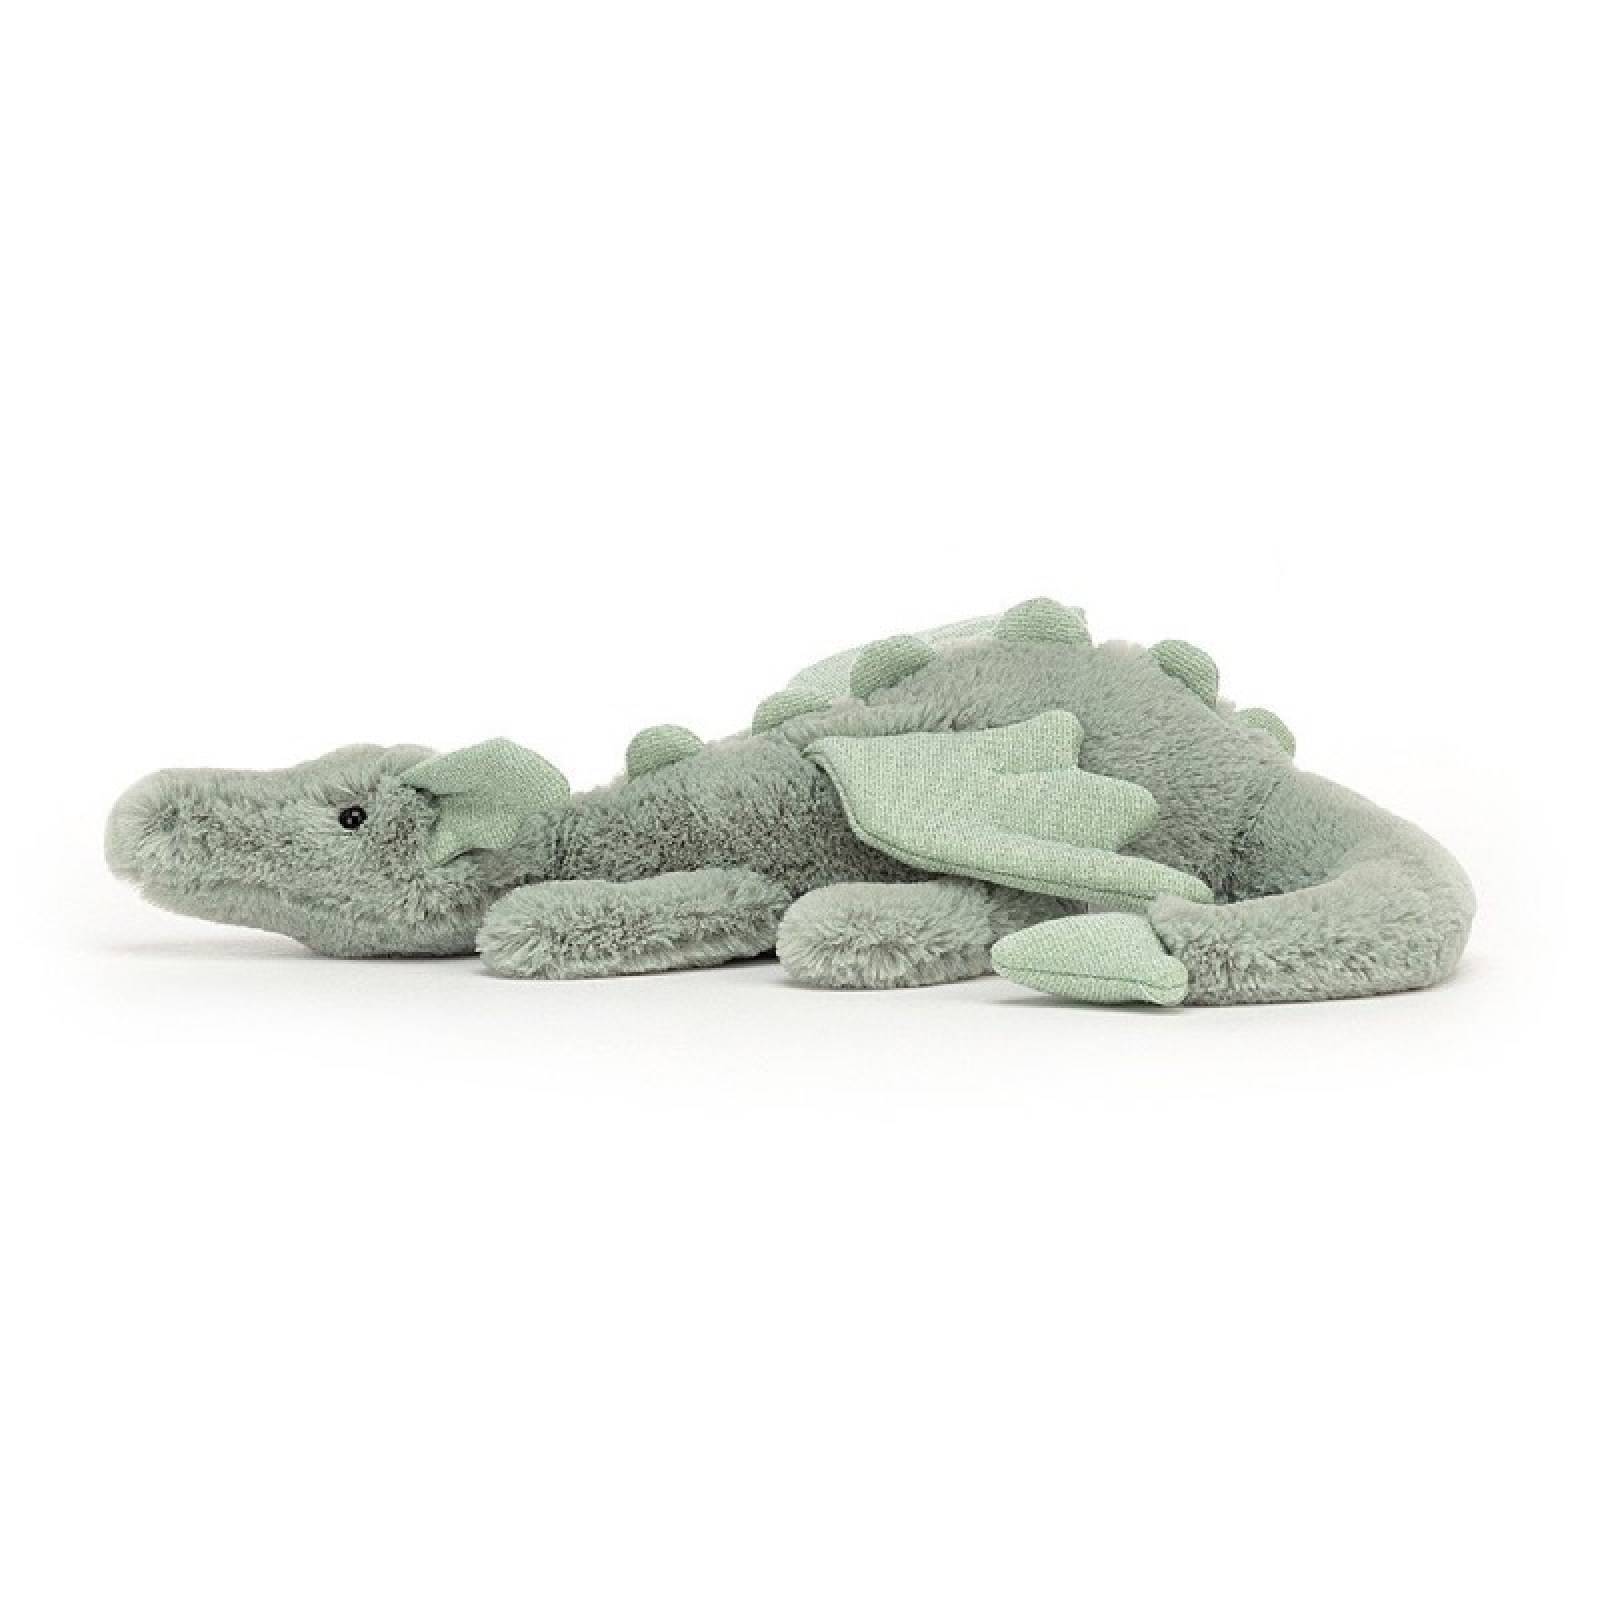 Little Sage Dragon Soft Toy By Jellycat thumbnails